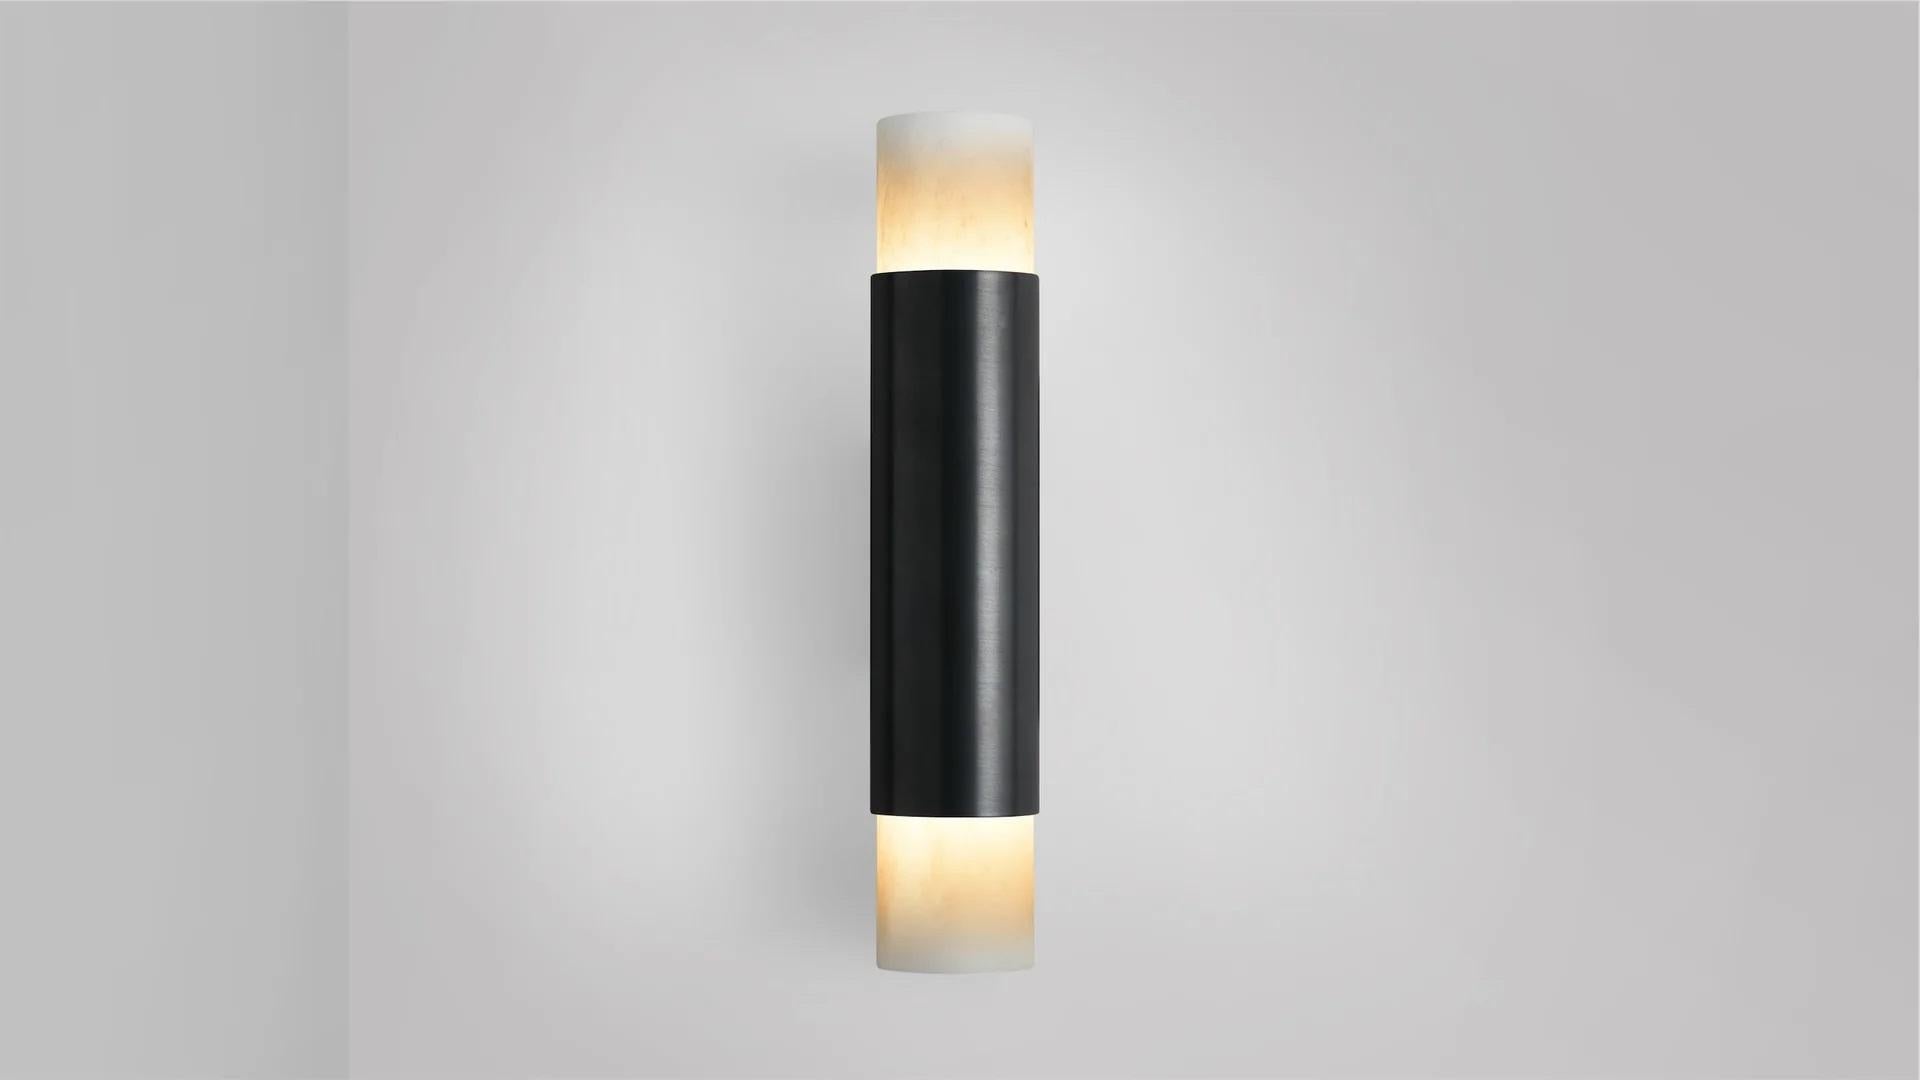 Tall Roma wall lamp by CTO Lighting
Materials: bronze, alabaster.
Dimensions: D 8.5 x W 5.5 x H 28 cm
Available in satin brass and bronze.

Celebrating the simplicity of line and form, The Roma collection is designed to highlight the noble quality